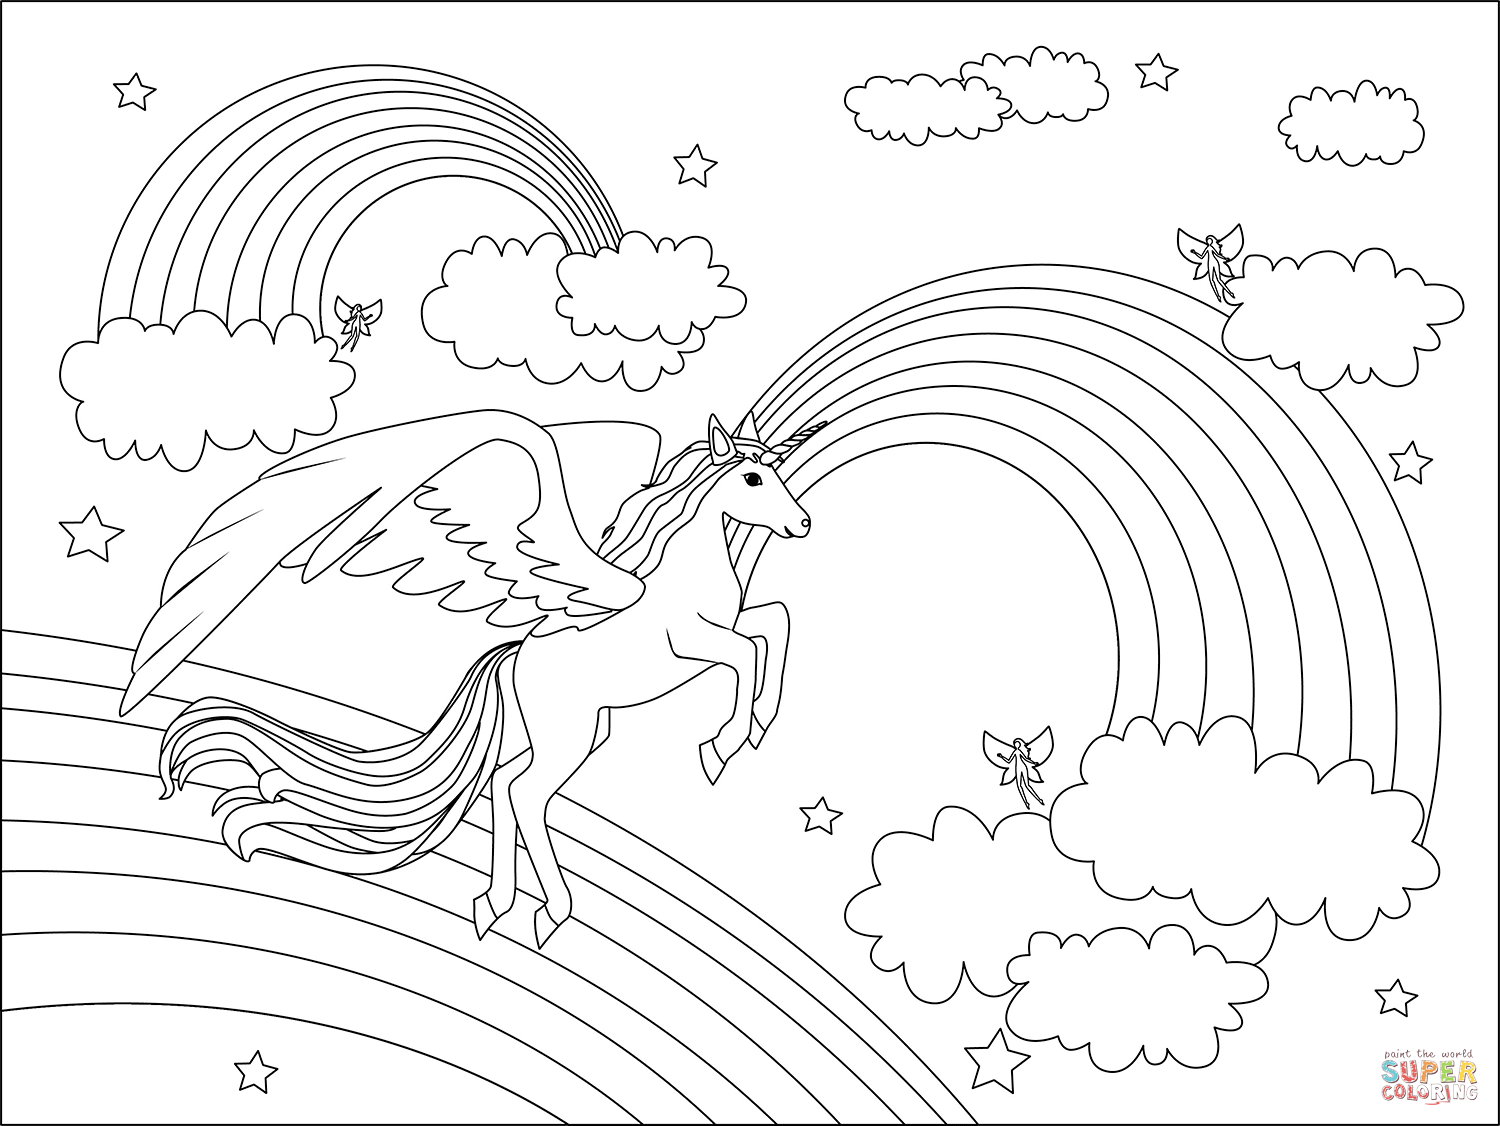 Winged unicorn and rainbow coloring page free printable coloring pages